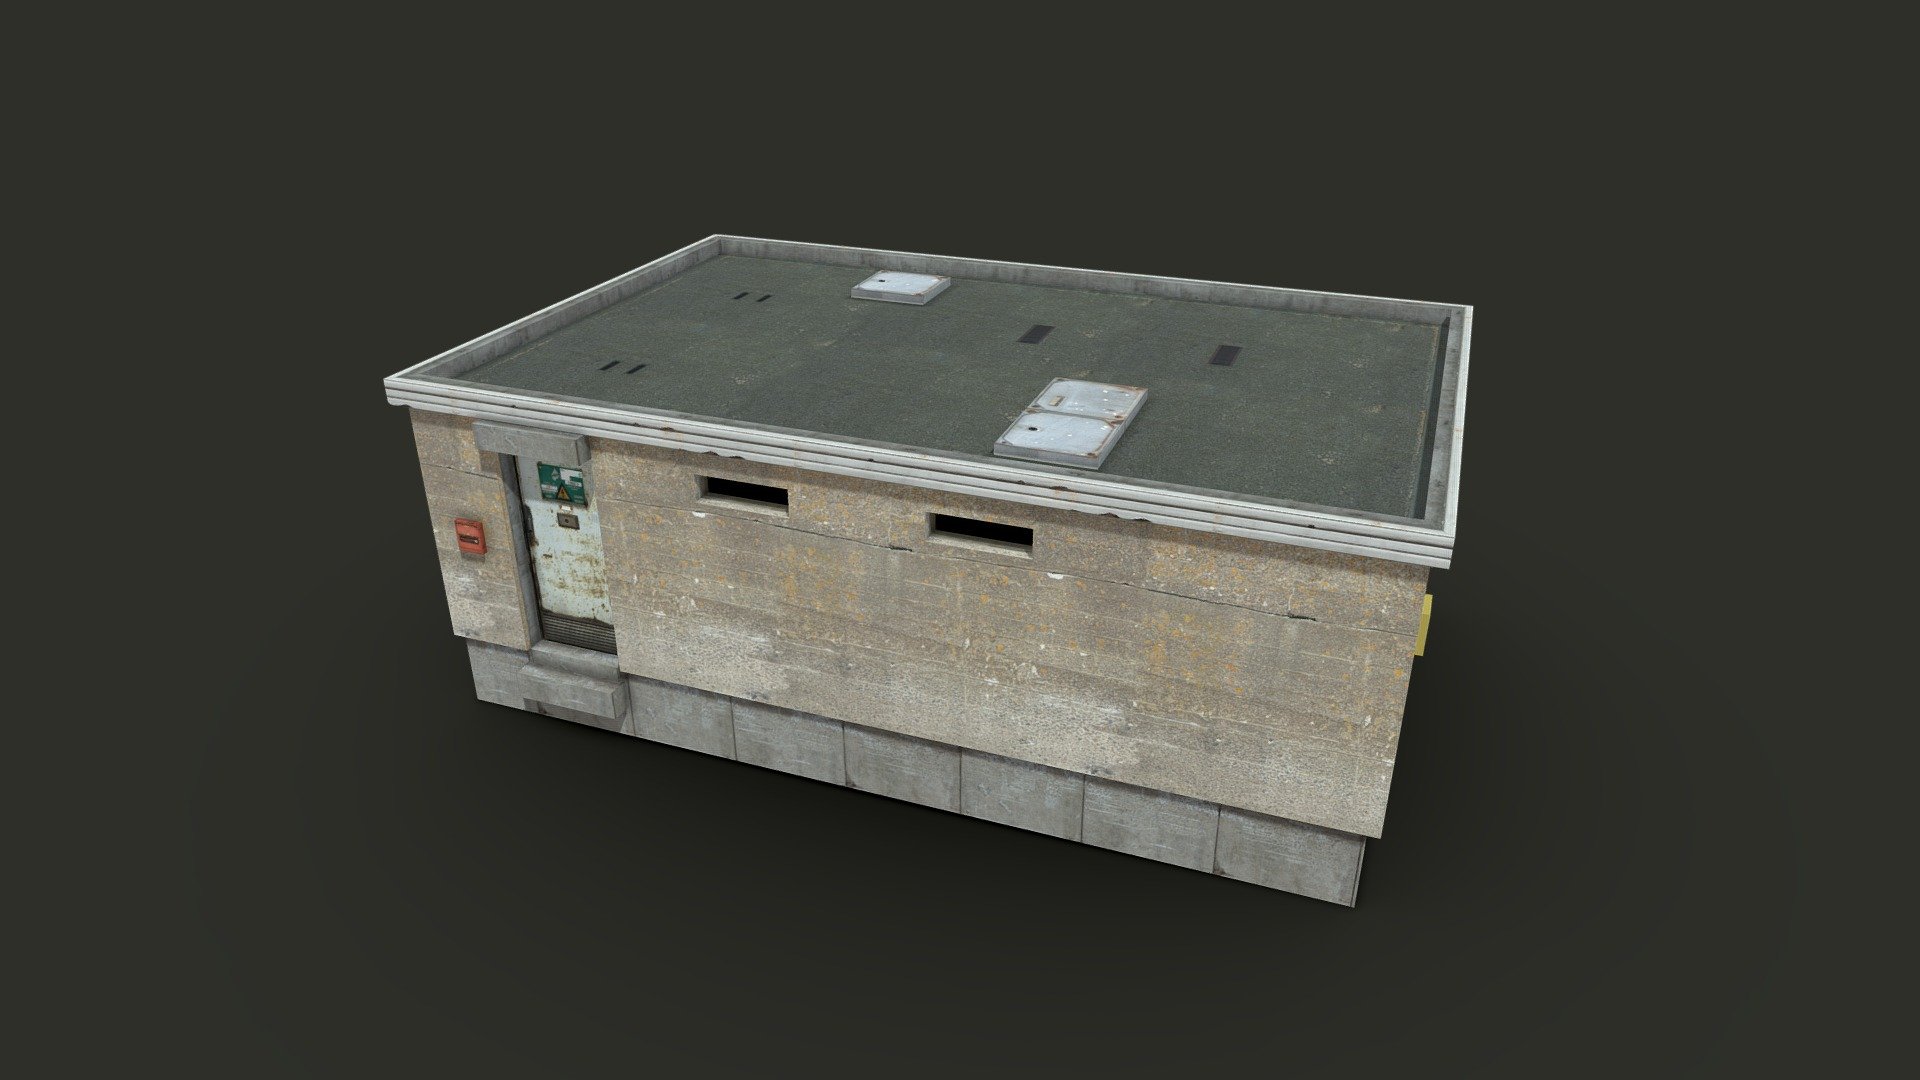 Generator house building - lowpoly game ready model

2K PBR Textures - Diffuse, Normal, Roughness - Generator House Building - Buy Royalty Free 3D model by l0wpoly 3d model